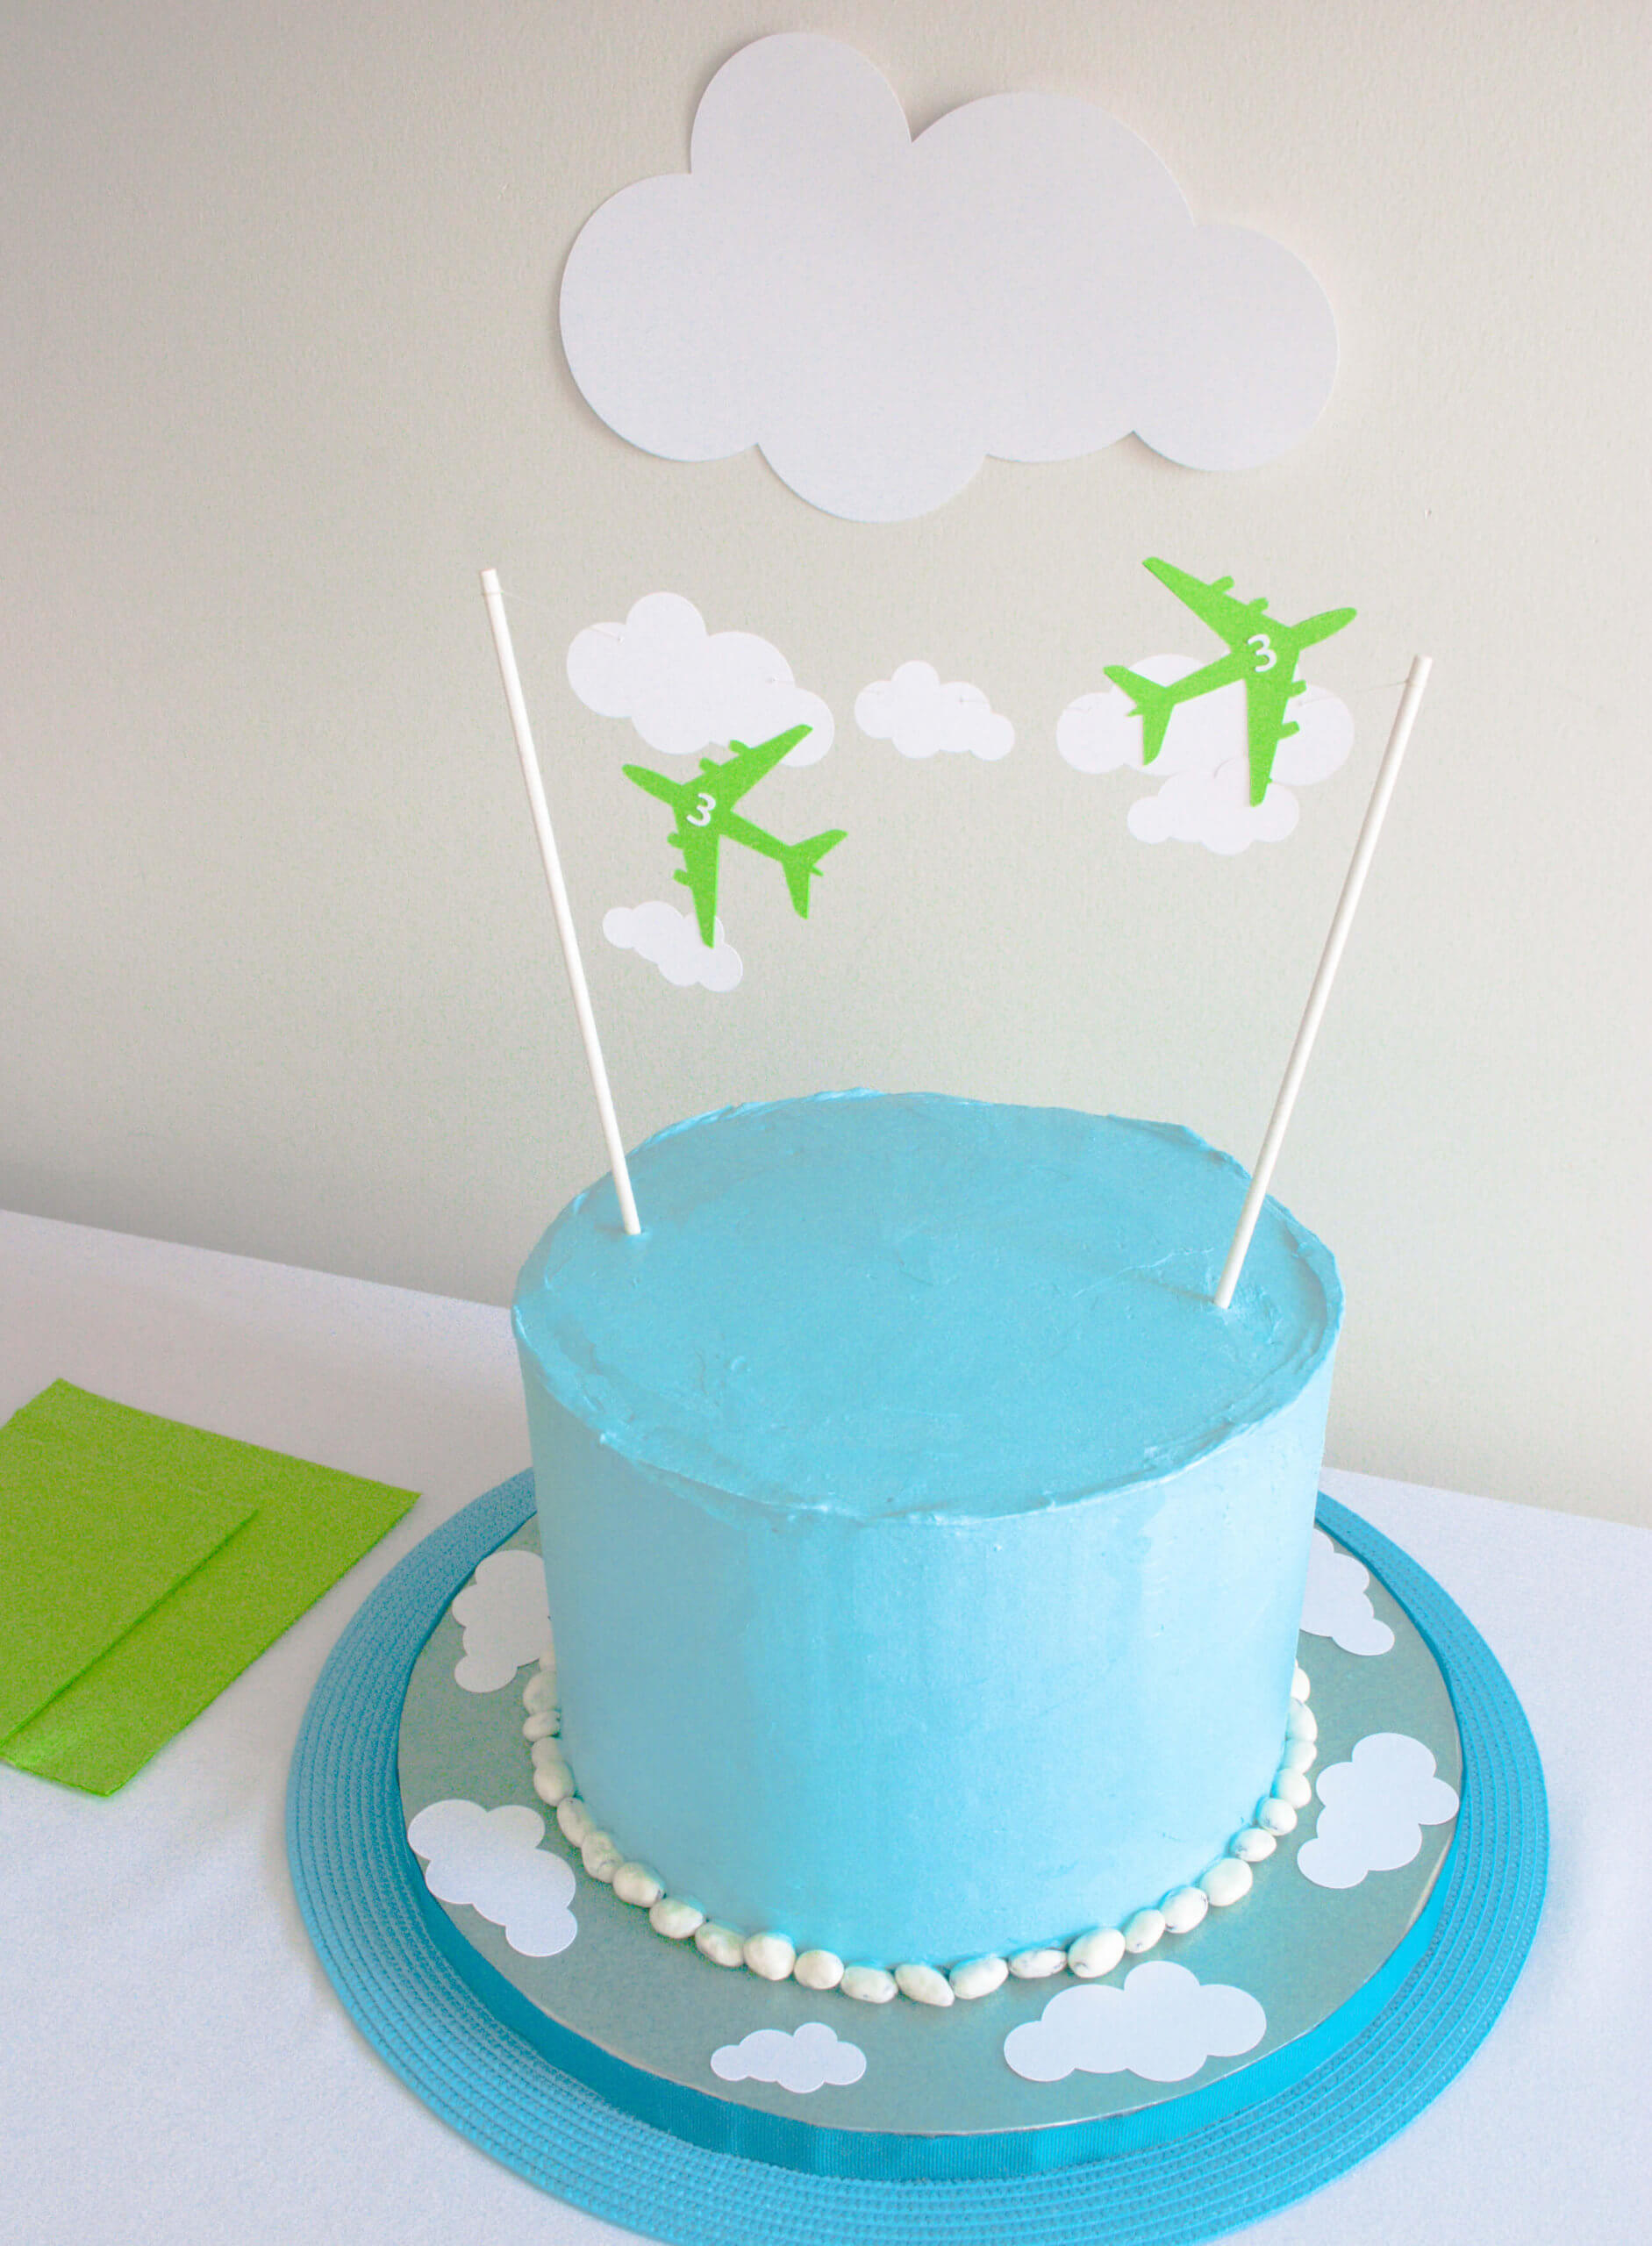 Kids birthday coming up? Learn how to make an airplane cake! | Jetstar